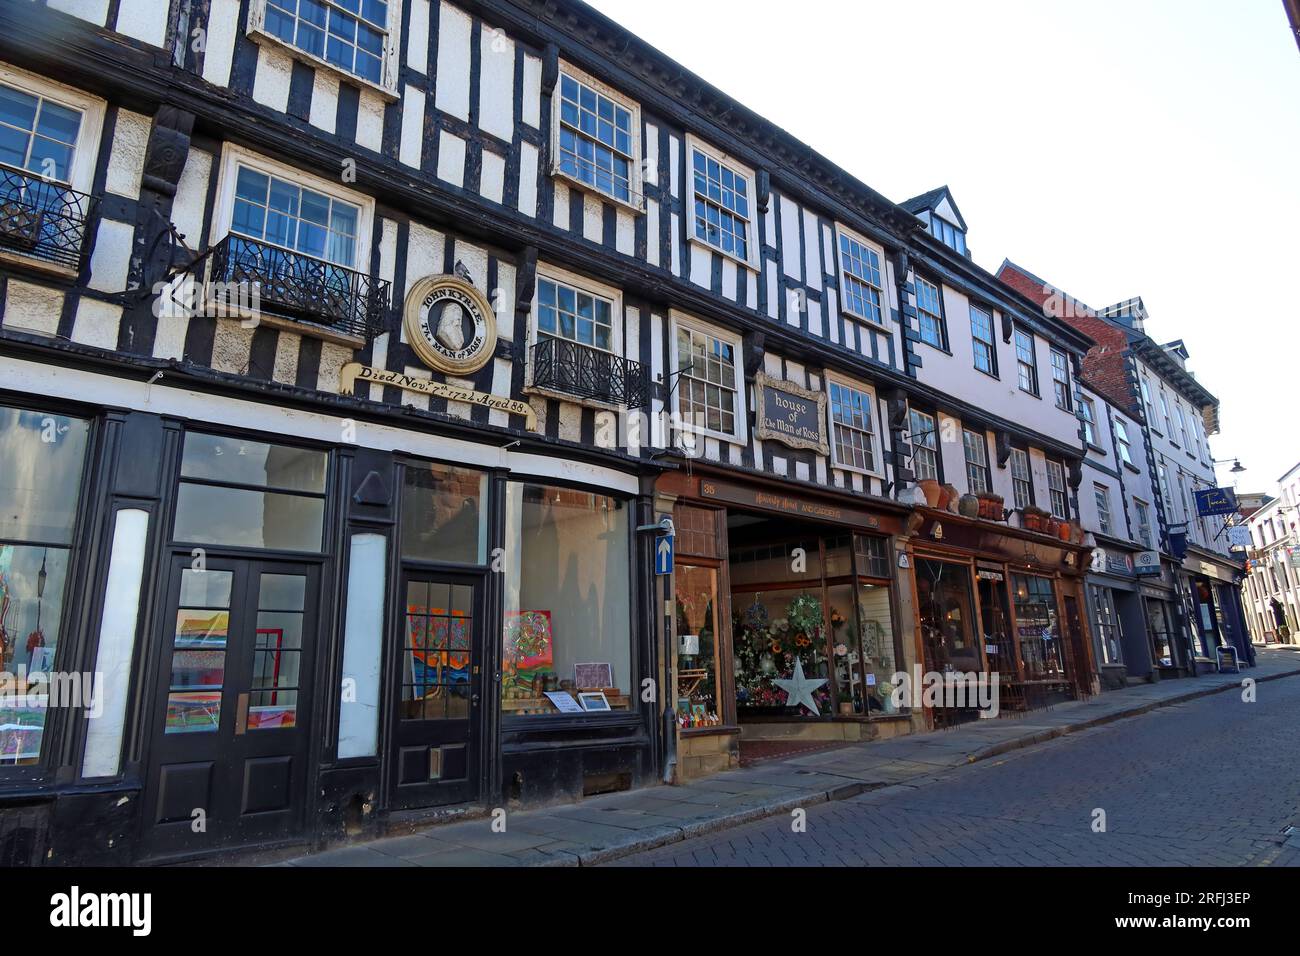 Timber framed buildings and architecture, commemorating John Kyrle, The man of Ross, died Nov 7th 1724, Ross-on-Wye, Herefordshire, England,HR9 5HD Stock Photo